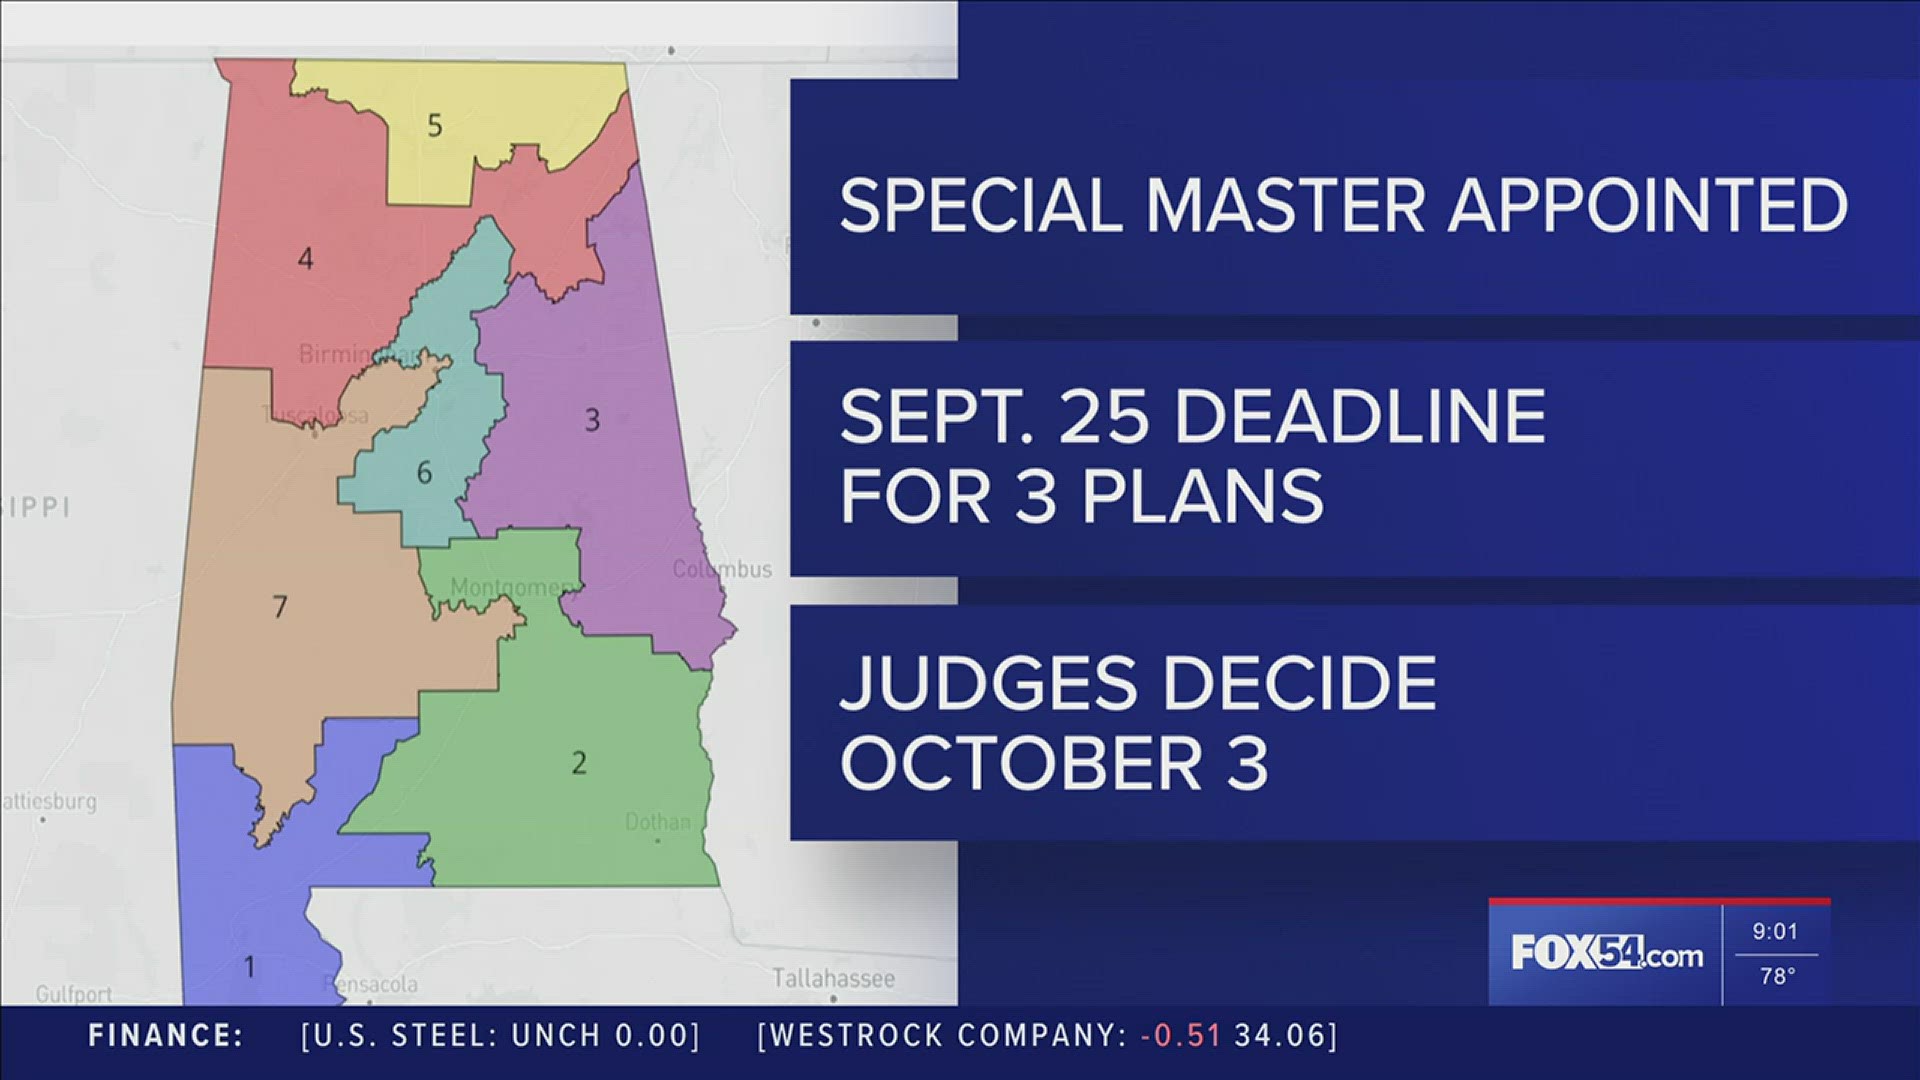 Despite losing at the federal level earlier this year, Alabama is pursuing another appeal over its redistricting map.